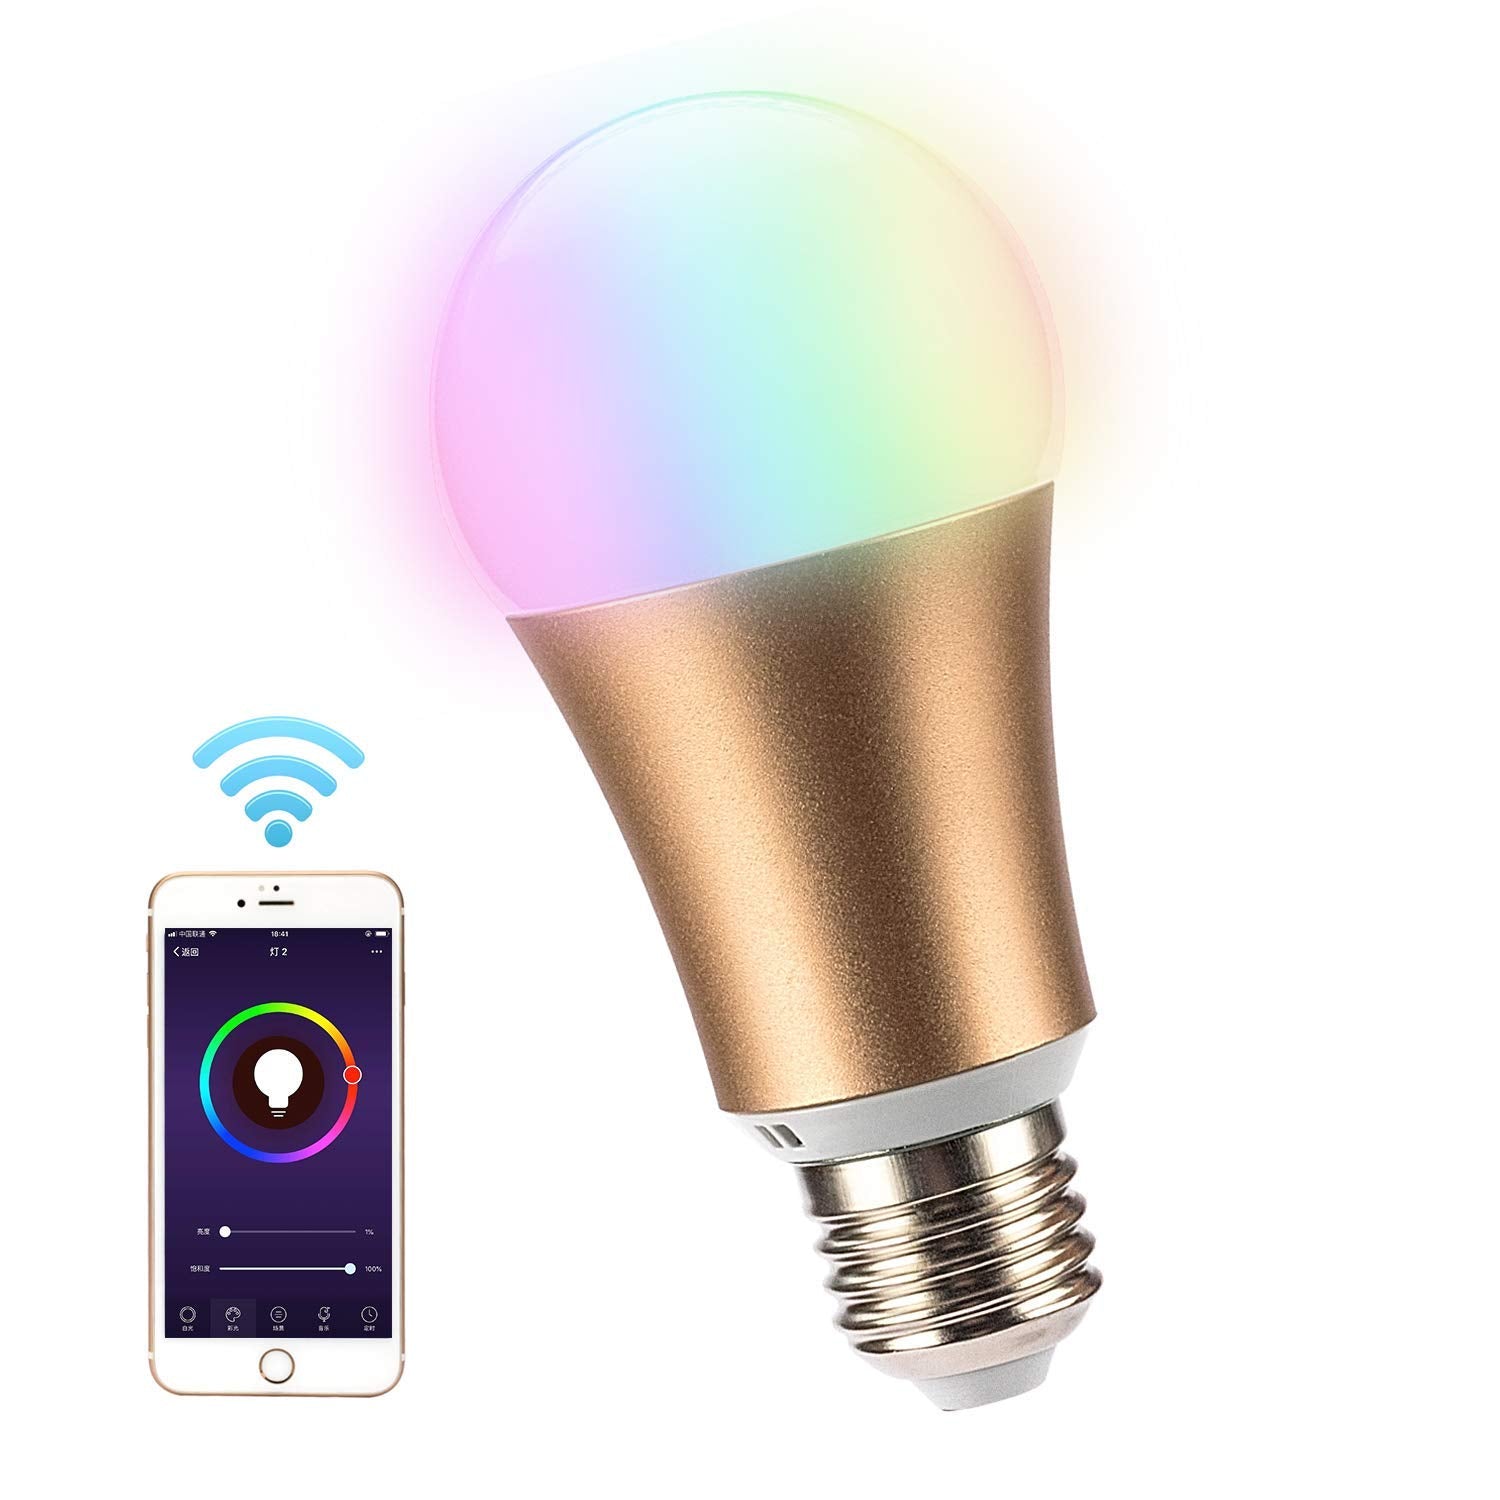 Leadleds WiFi Smart LED Light Bulb Multi-Color Dimmable Compatible with Alexa & Google Assistant - Leadleds